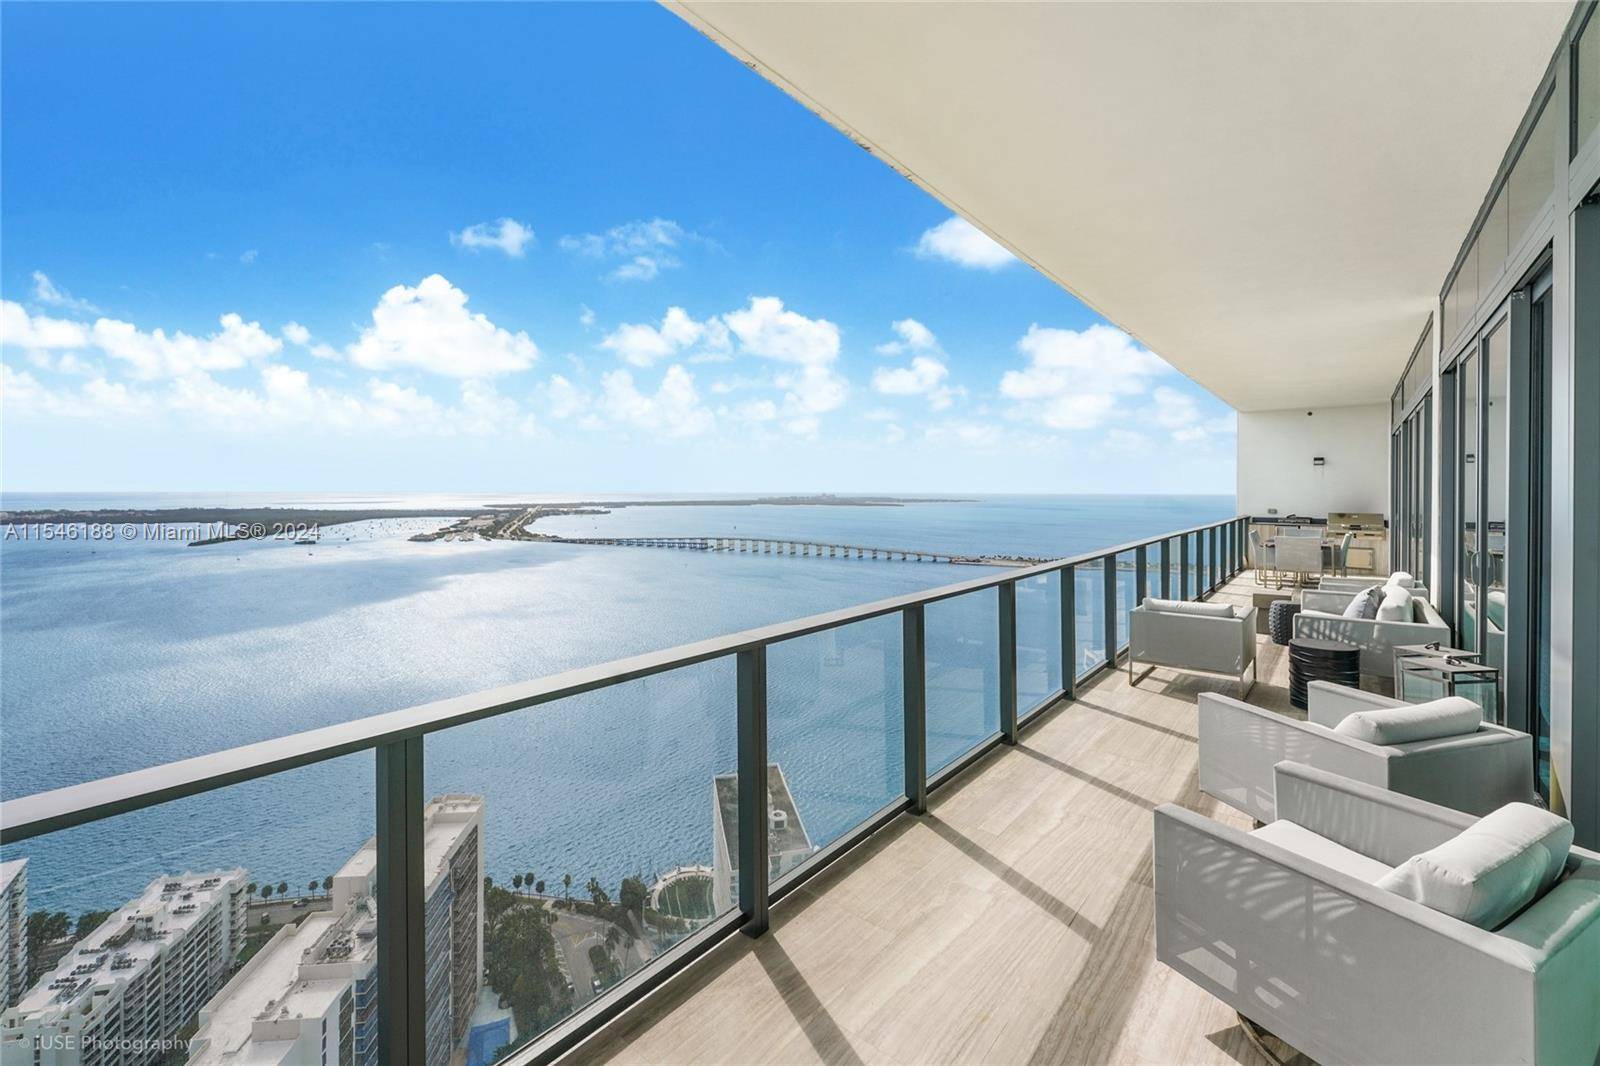 One of only 4 of the most desirable Line 02 units in Echo Brickell with completely unobstructed direct water and skyline views.